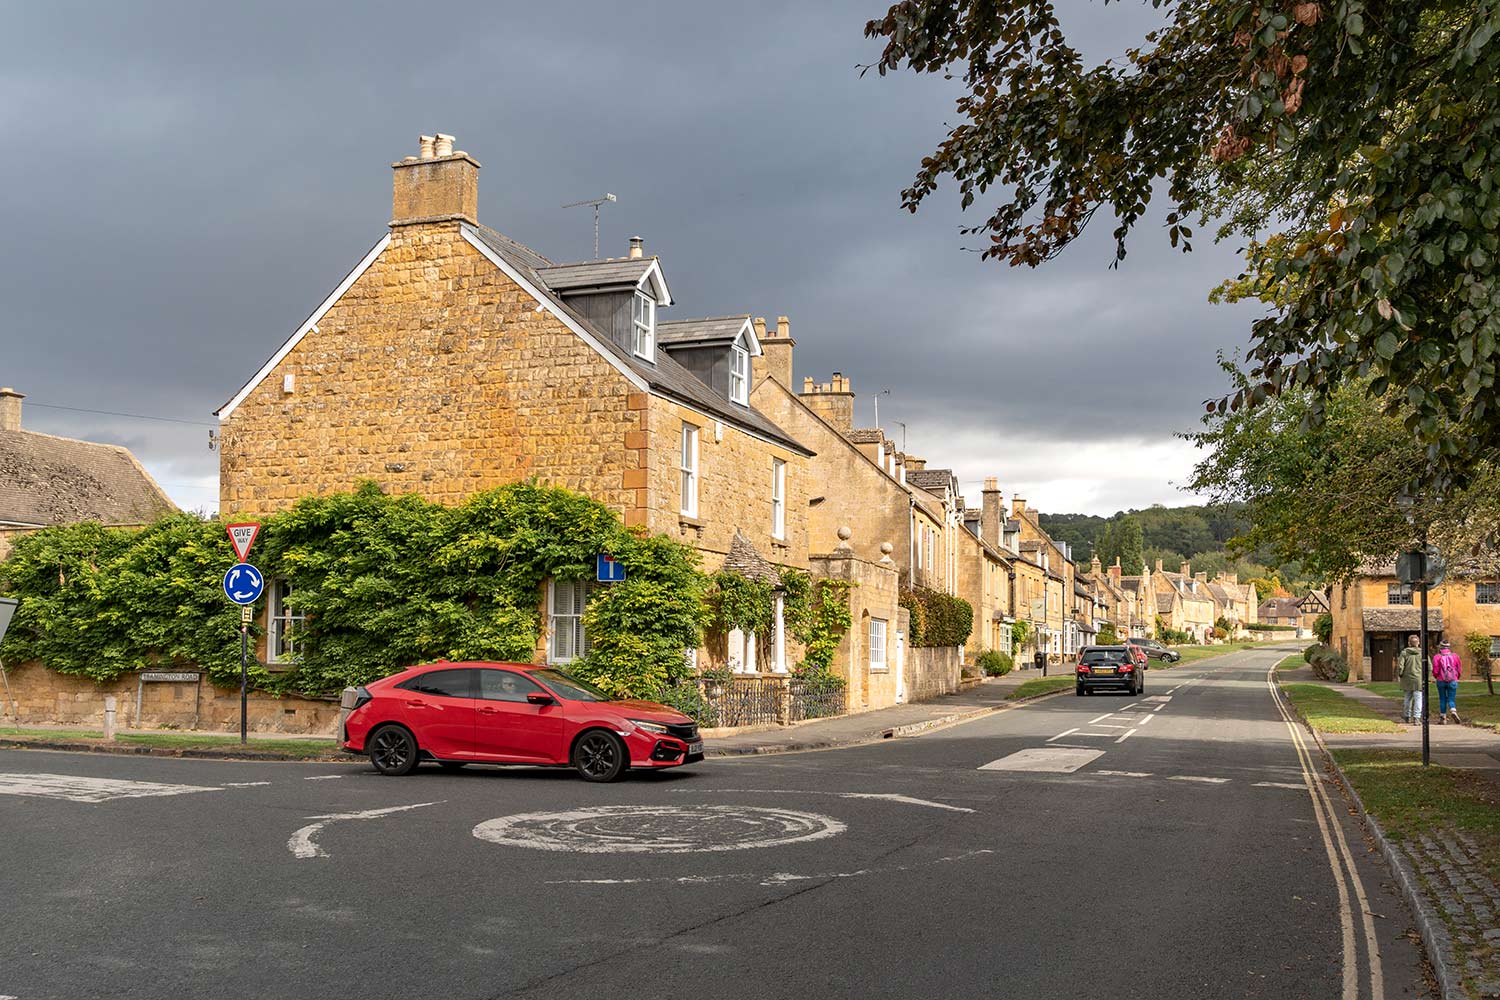 Rond-point, Broadway, Cotswolds, Angleterre, Royaume-Uni / Roundabout, Broadway, Cotswolds, England, UK